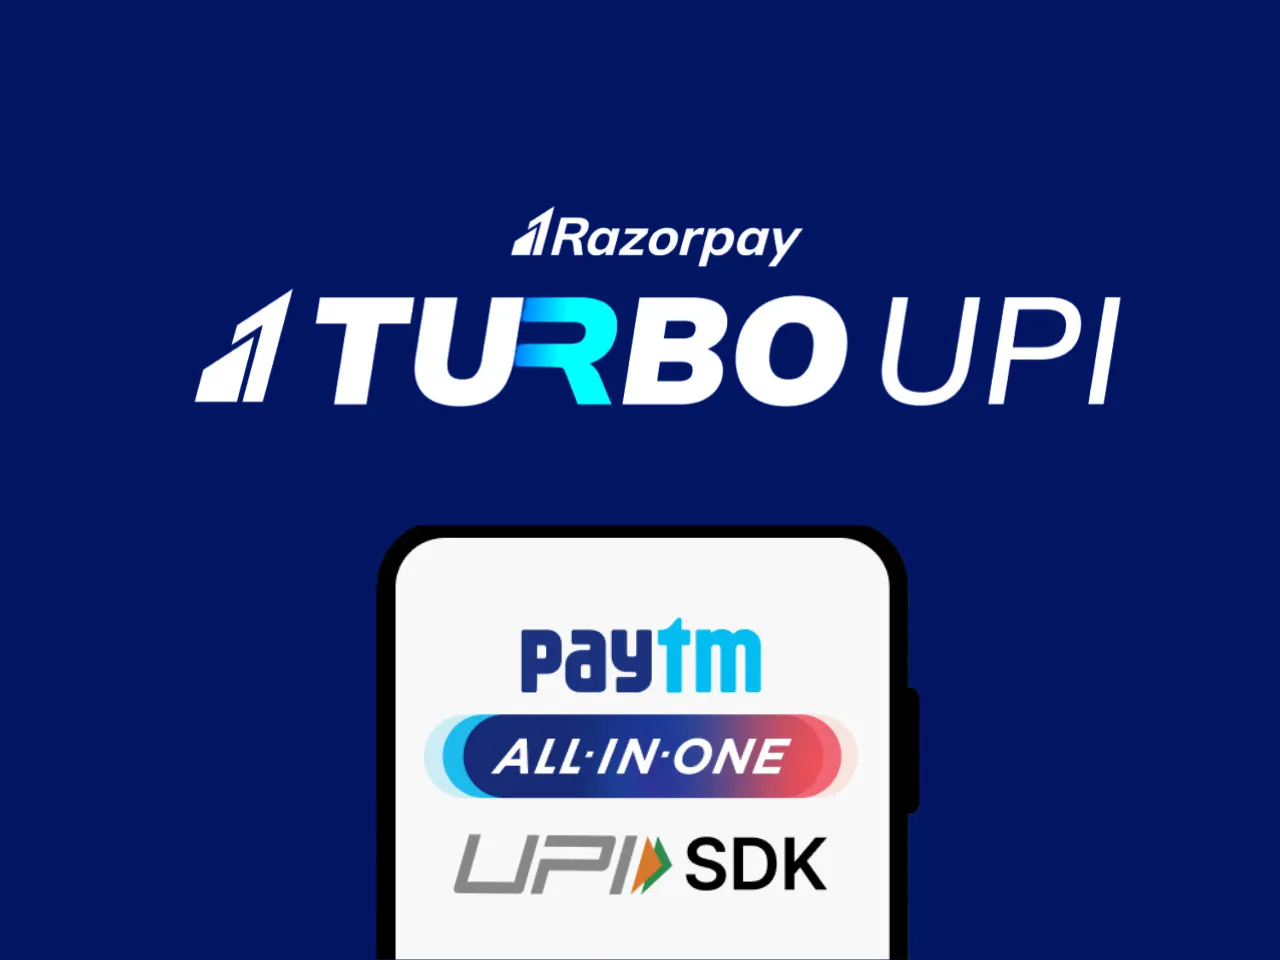 The Evolution of UPI and its Impact on the Payment Landscape